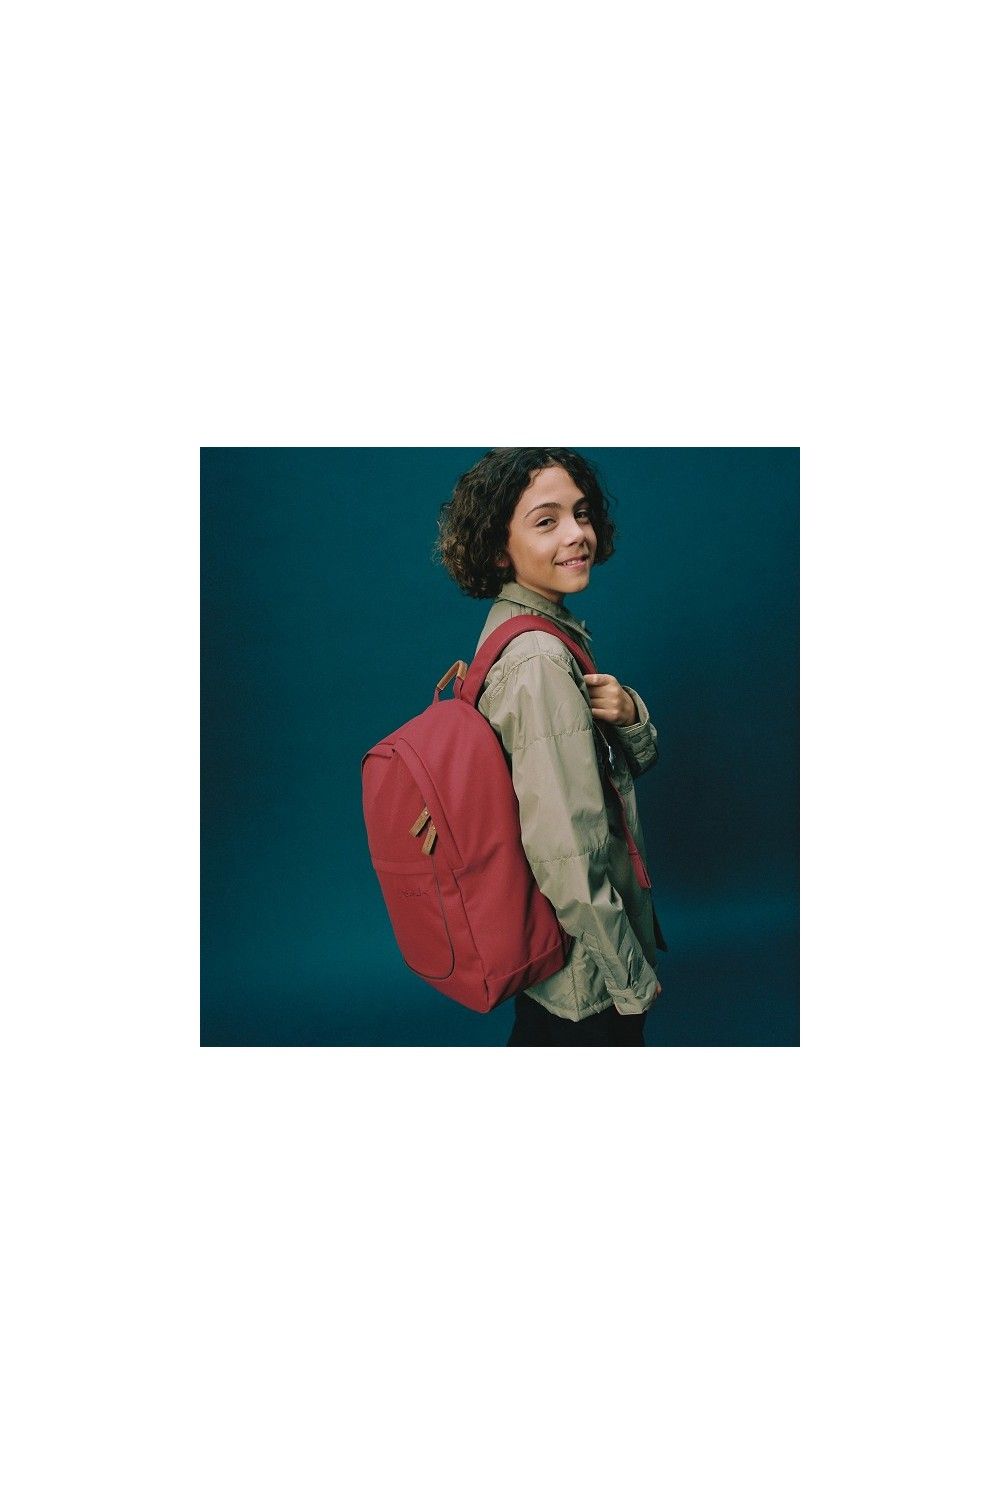 Satch Fly Rucksack Nordic Red